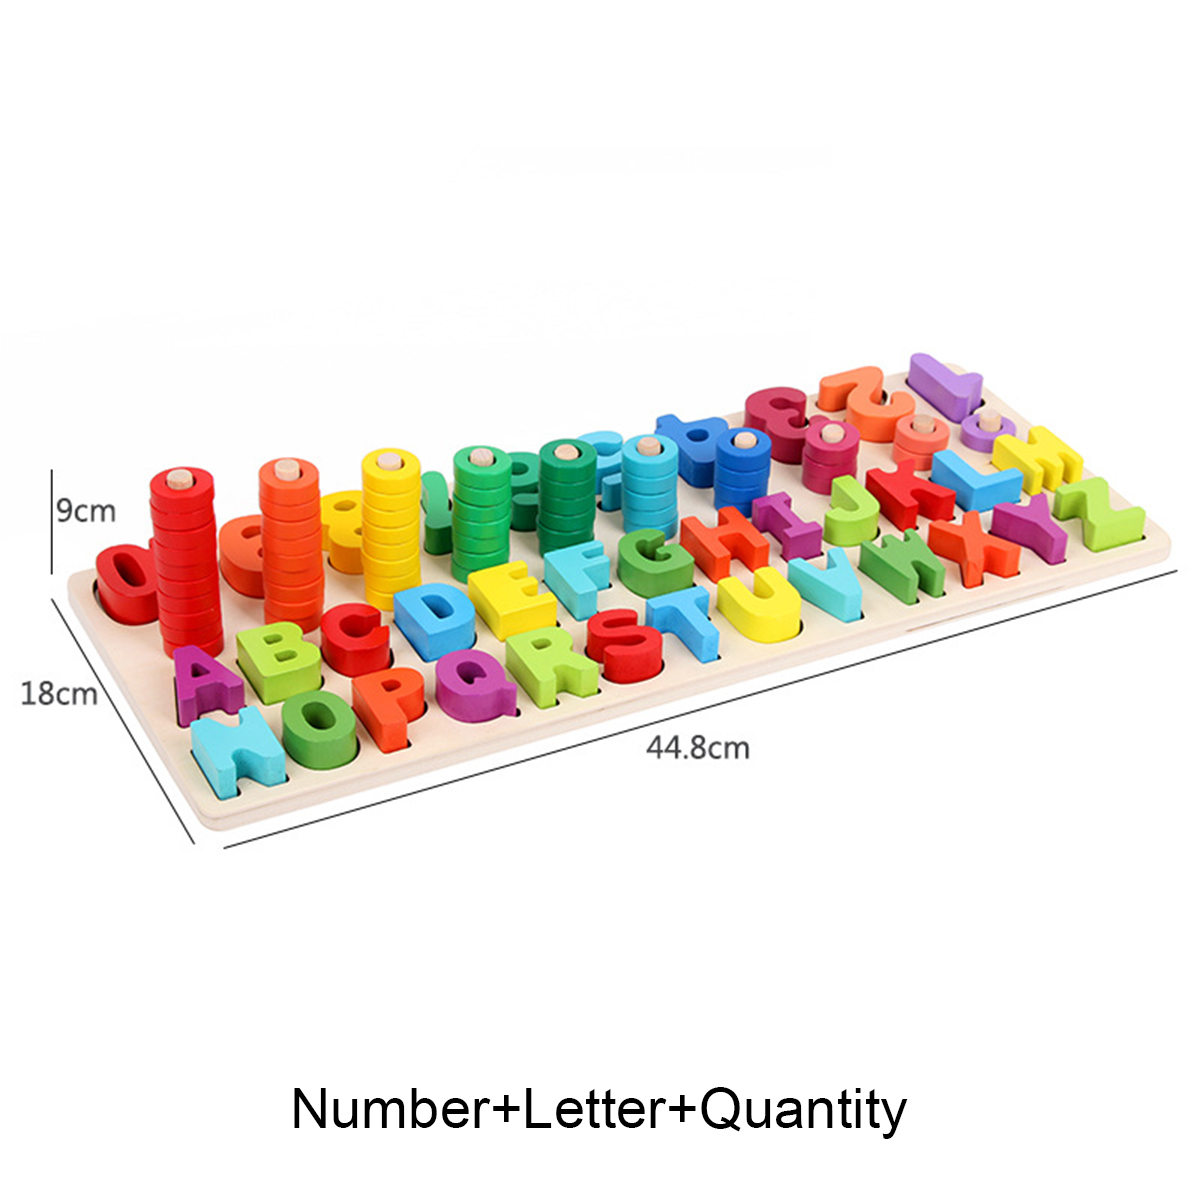 Children-Wooden-Montessori-Materials-Learning-To-Count-Numbers-Matching-Digital-Shape-Match-Early-Ed-1605437-10